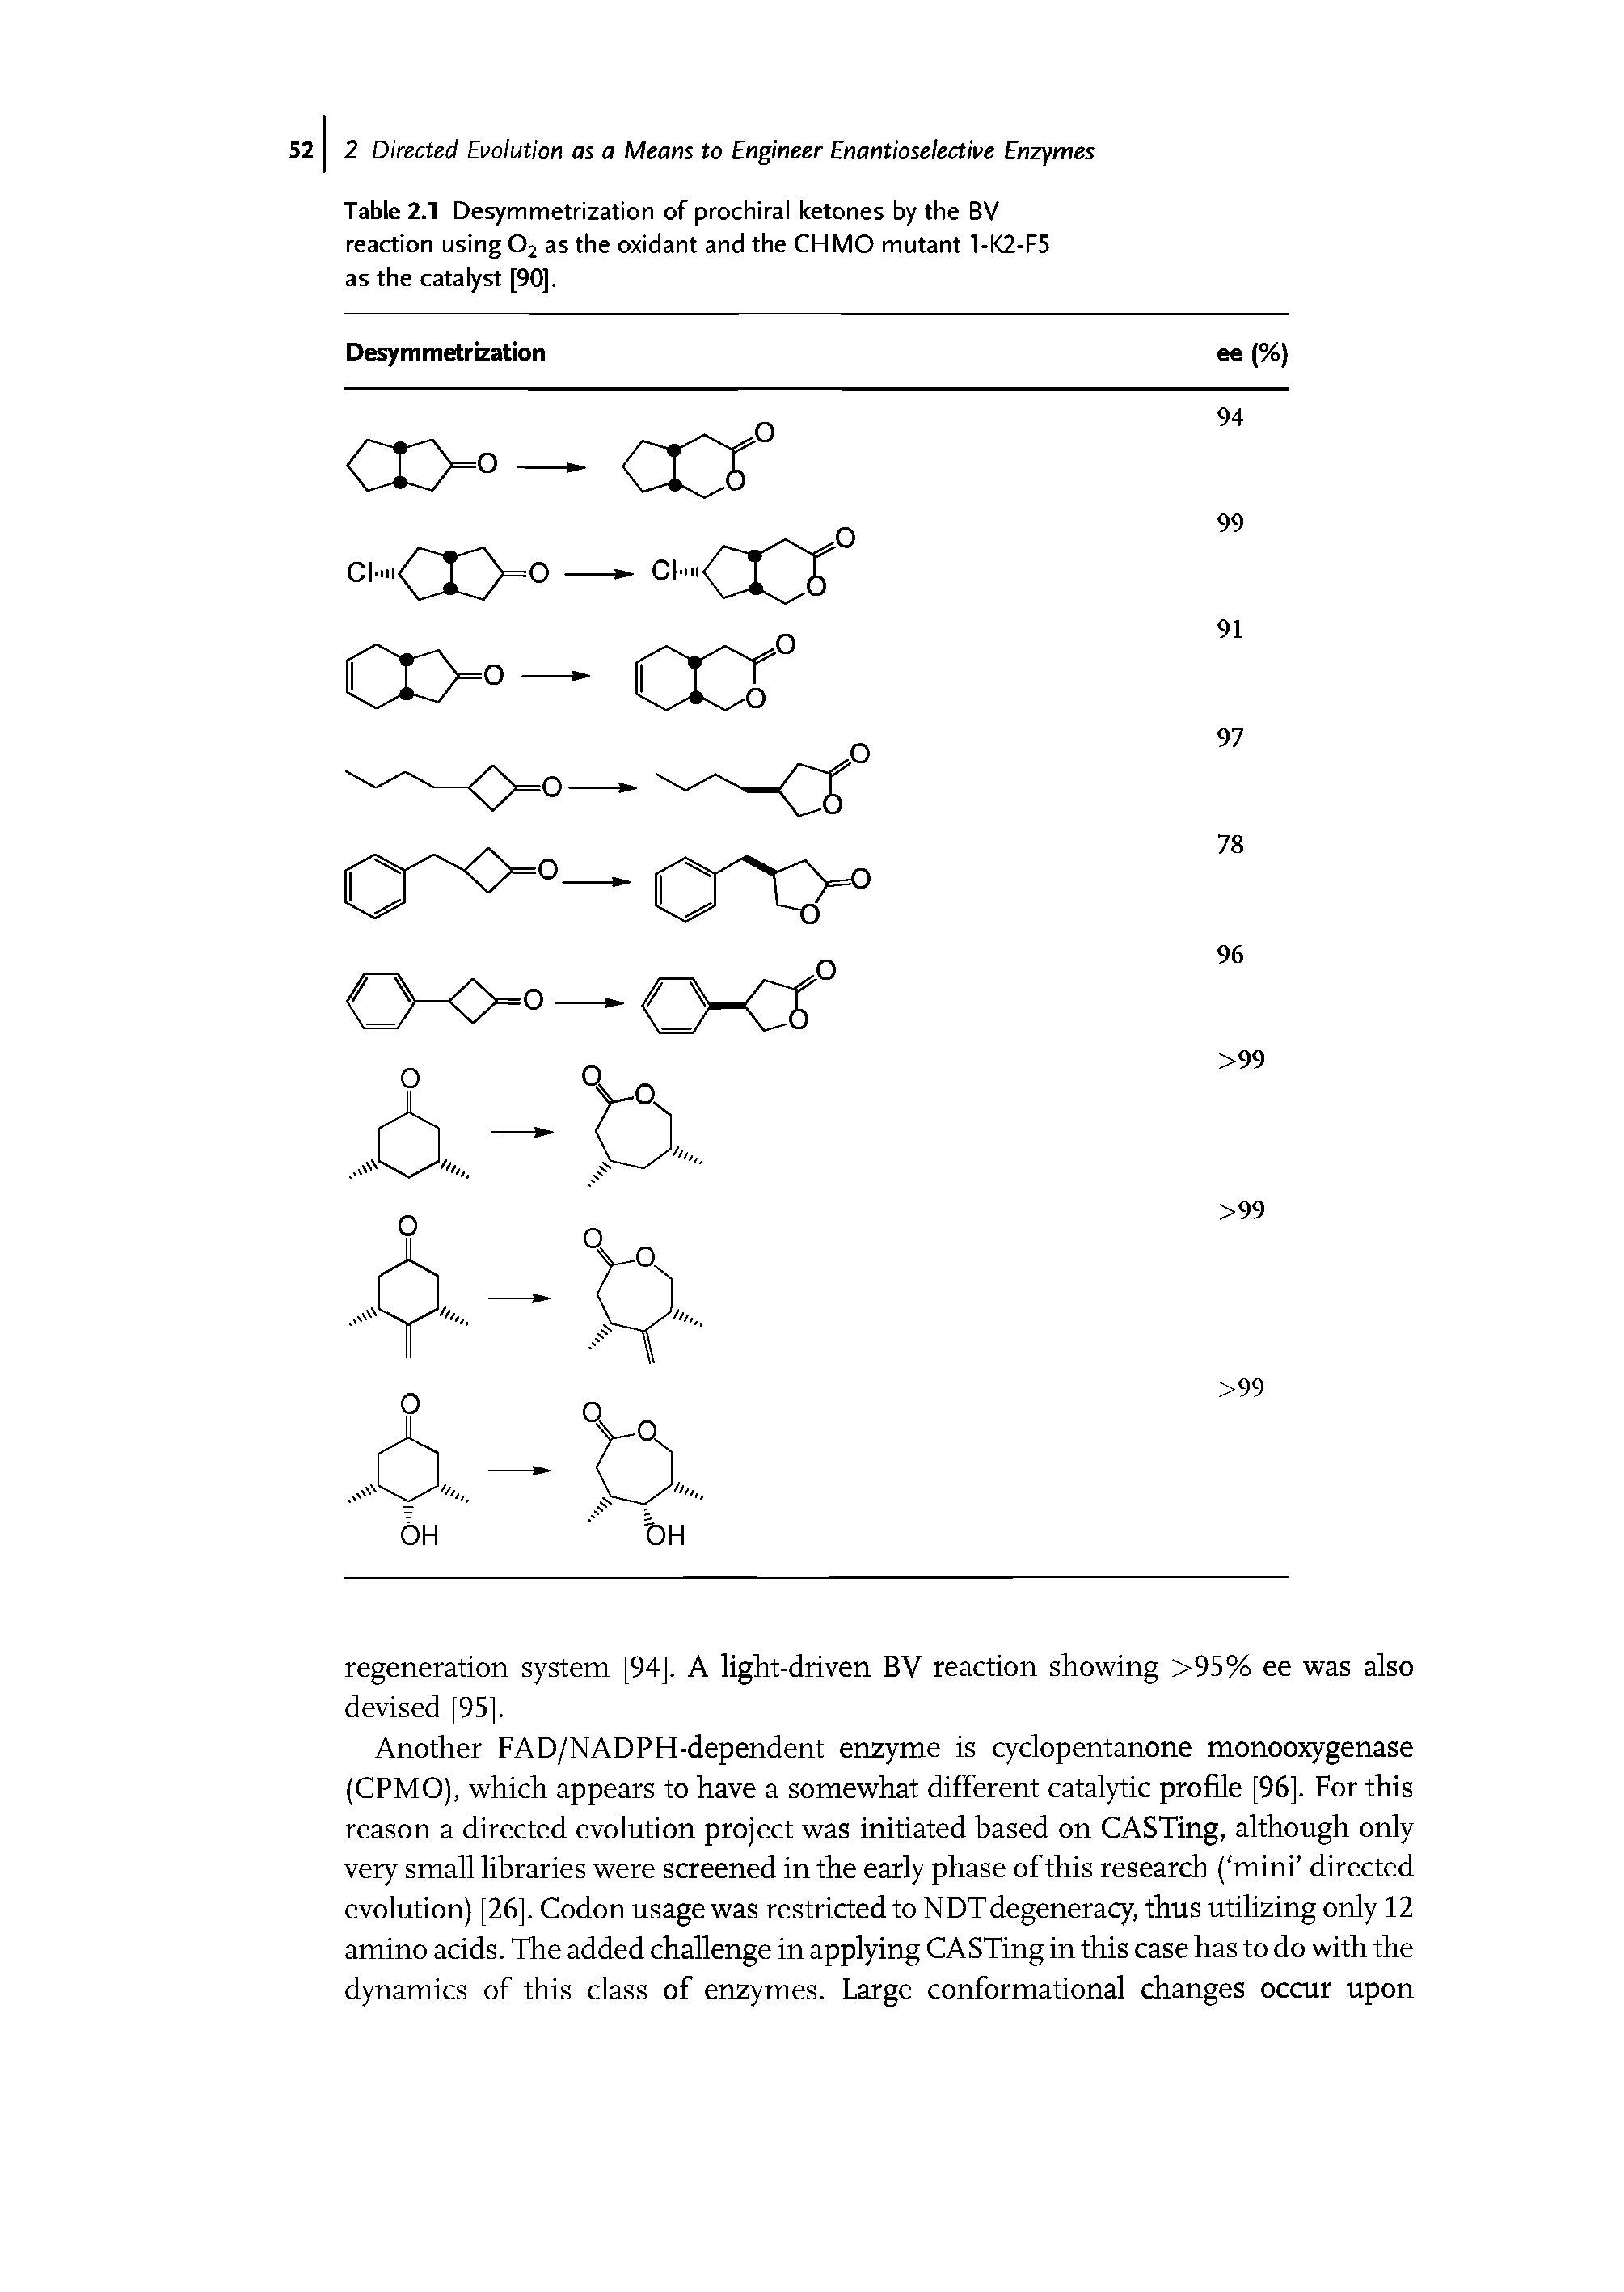 Table 2.1 Desymmetrization of prochiral ketones by the BV reaction using O2 as the oxidant and the CHMO mutant 1-K2-F5 as the catalyst [90].